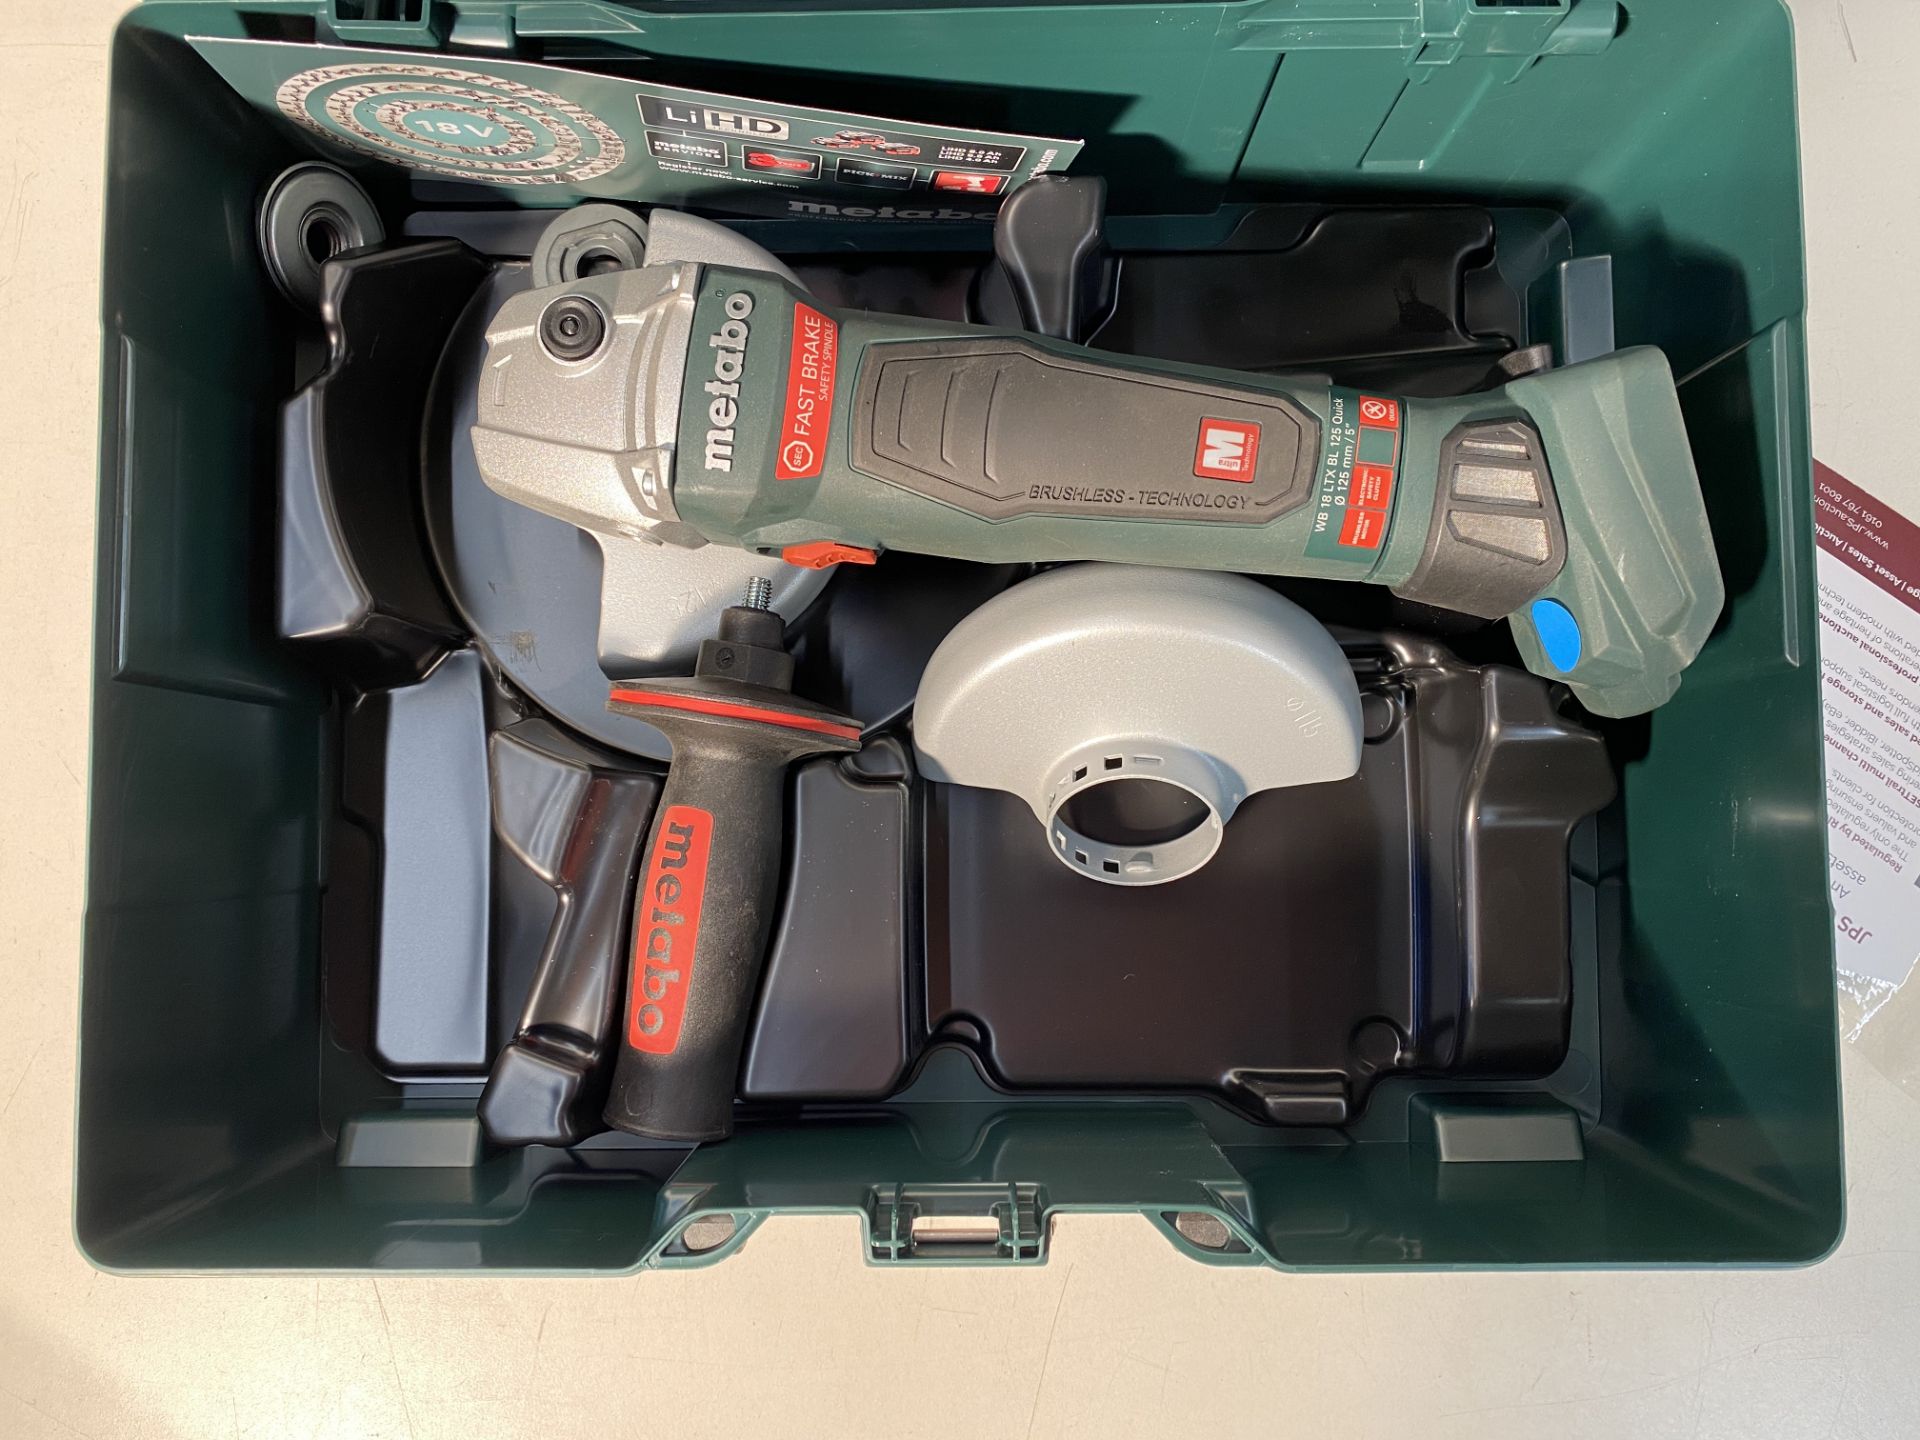 Metabo WB18LTXBL125 18v Quick 5in Brushless Angle Grinder Bare Unit and MetaLoc - Image 3 of 4